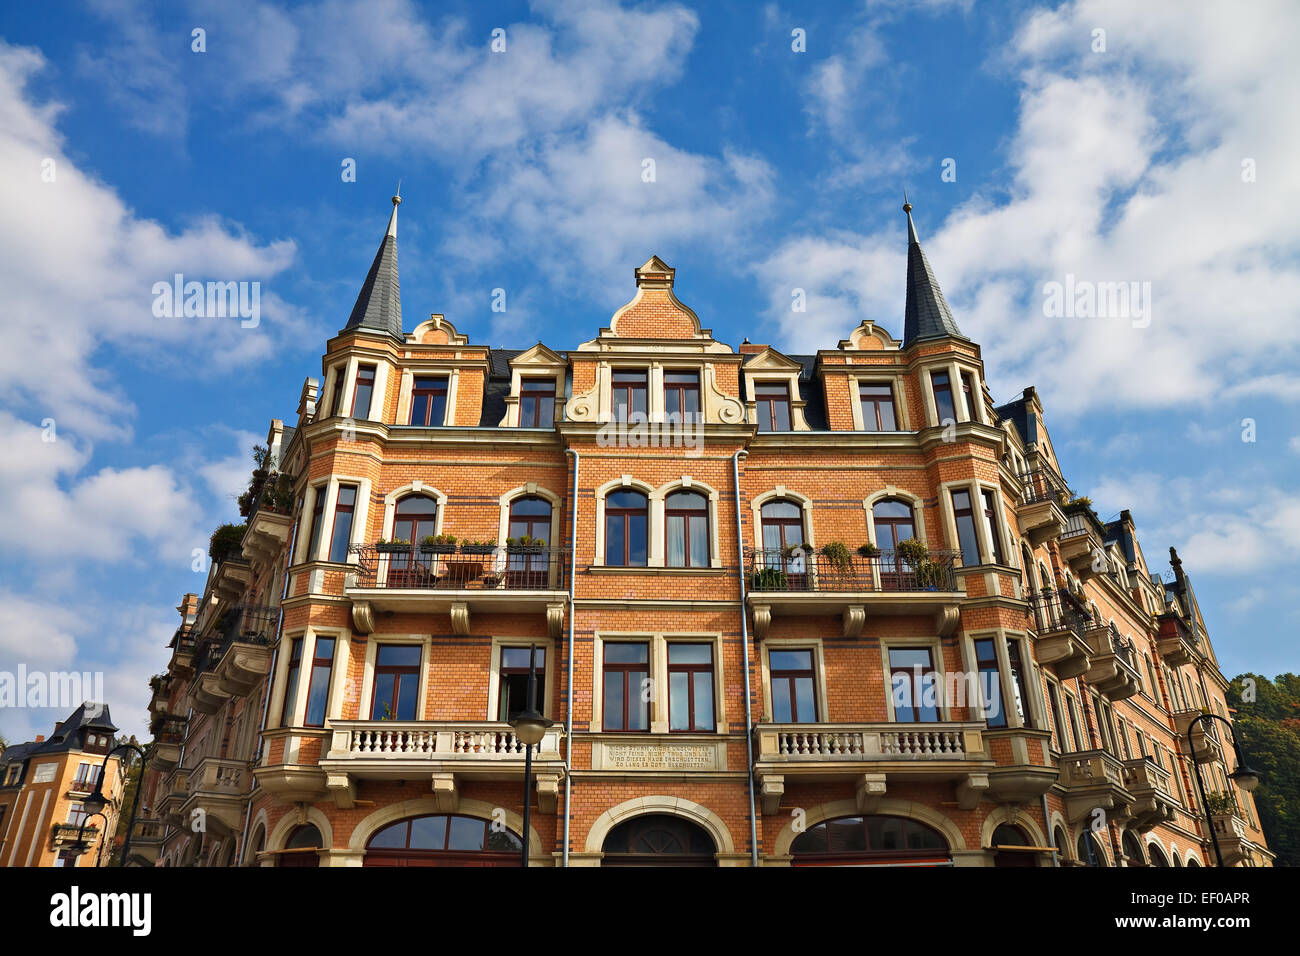 A historic building in Loschwitz. Stock Photo